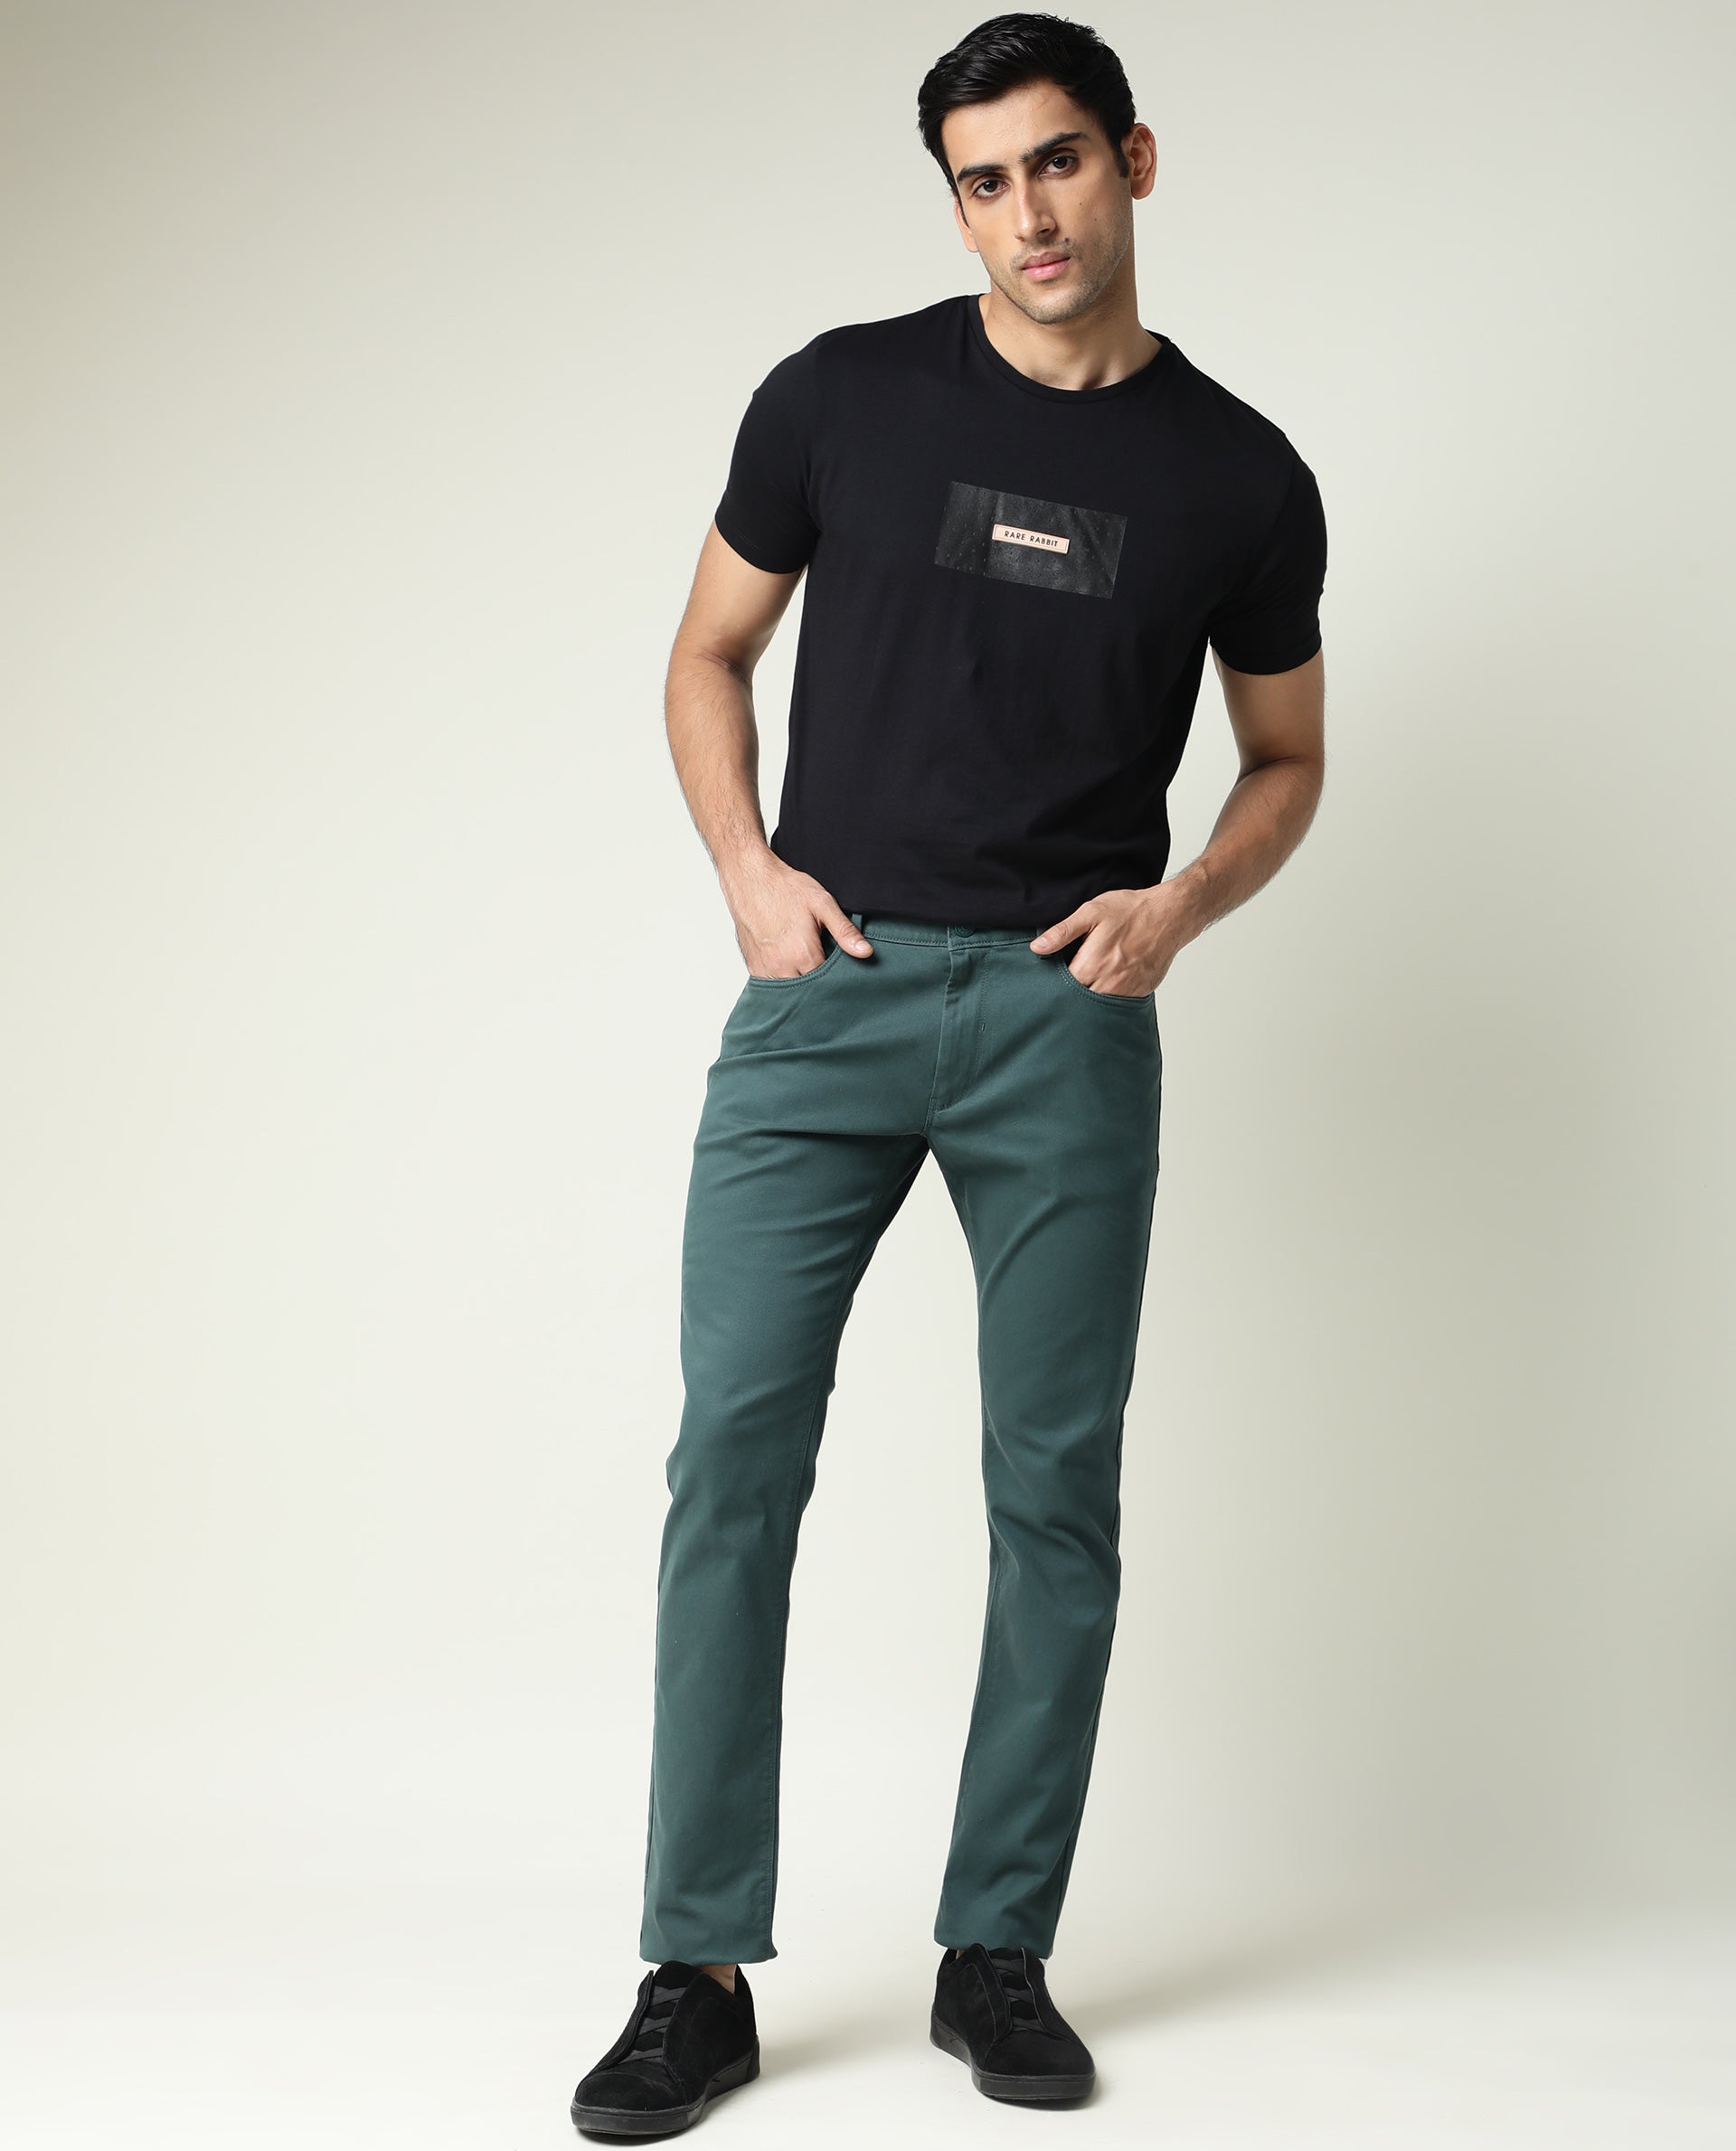 Homme Trousers  Slim Fit Turquoise  Pantalons Bikkembergs  AufildelaLune